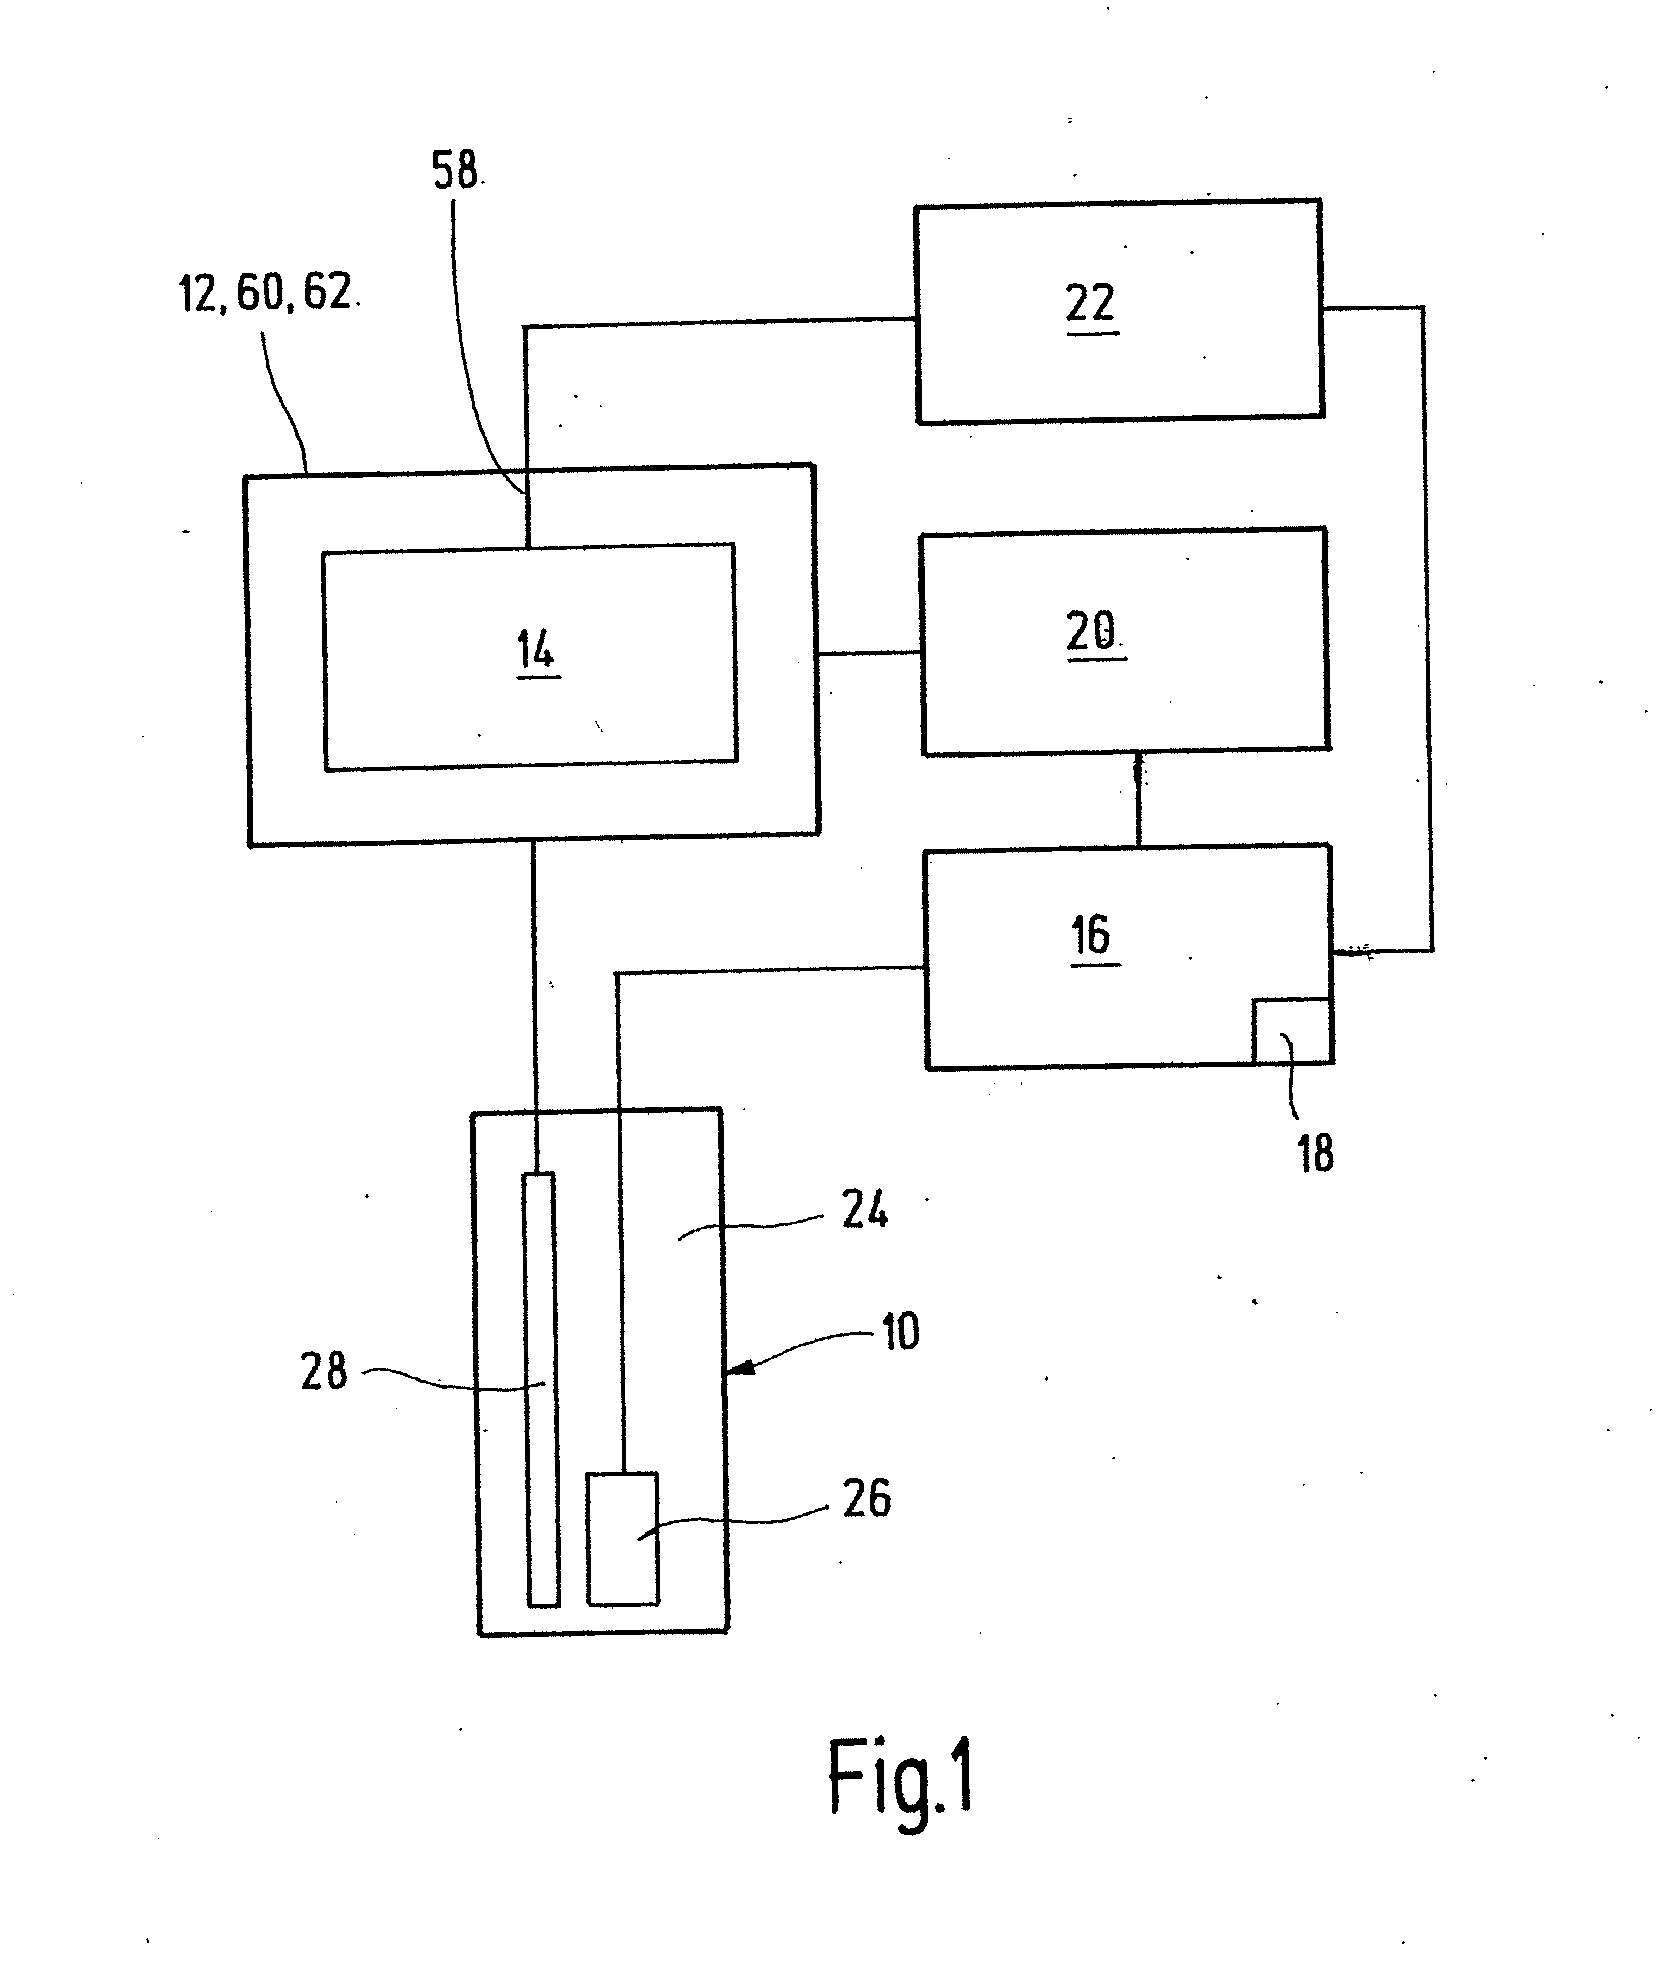 Analyte monitoring sensor system for monitoring a constituent in body tissue